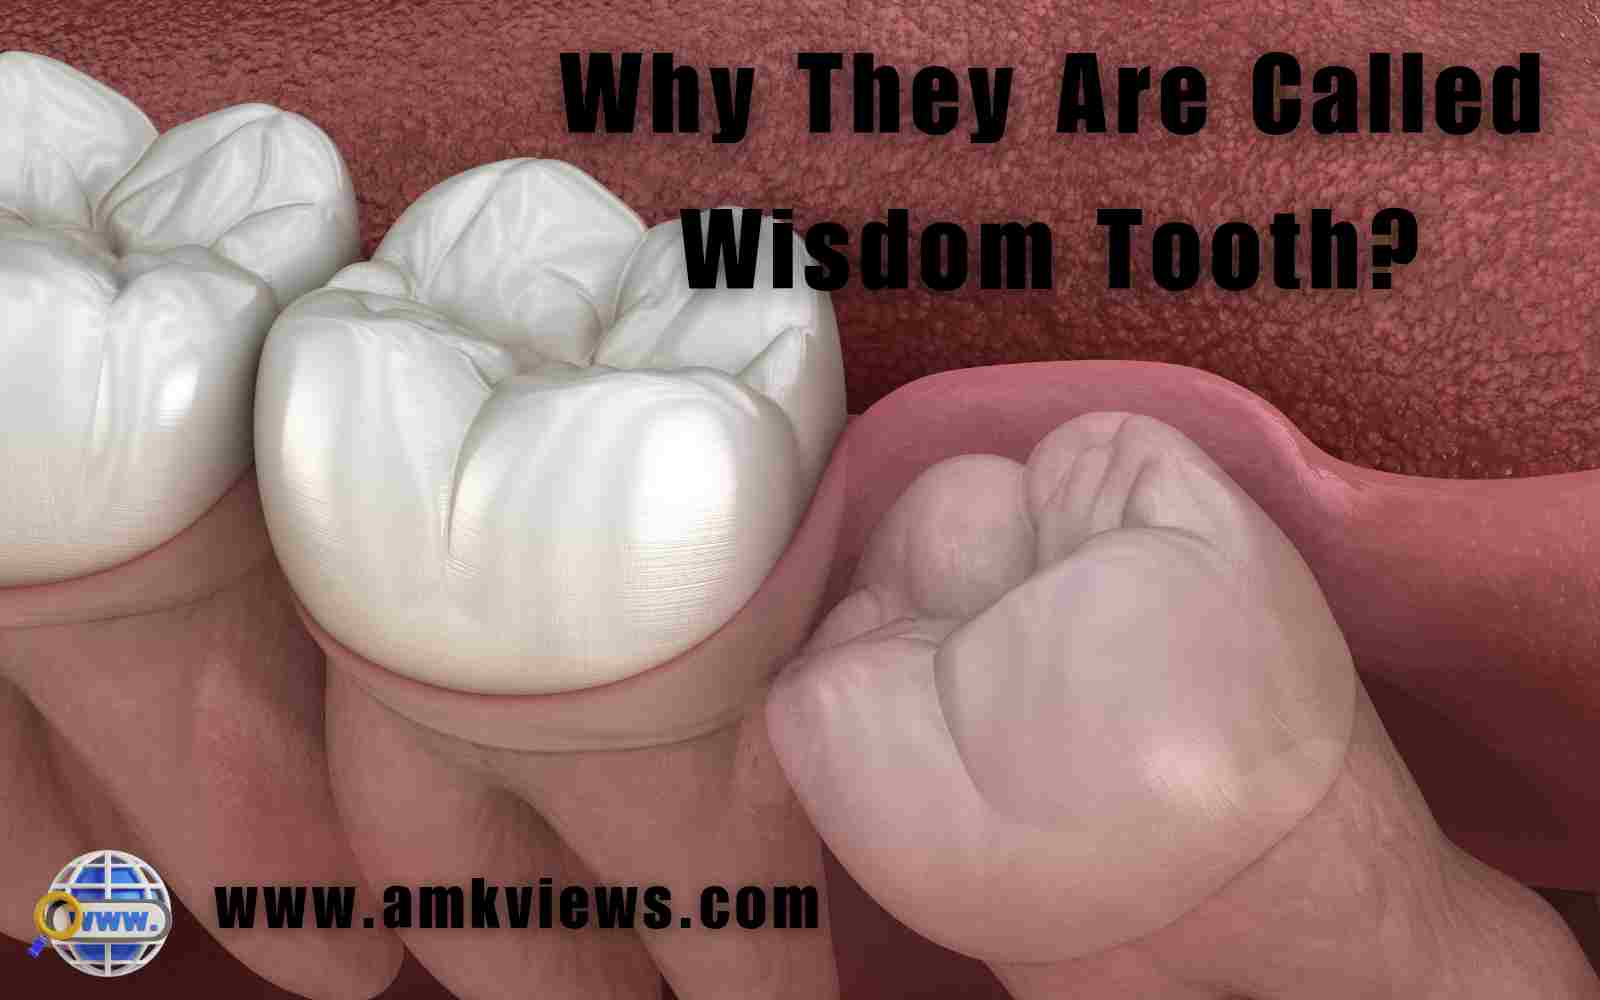 Why They Are Called Wisdom Tooth?